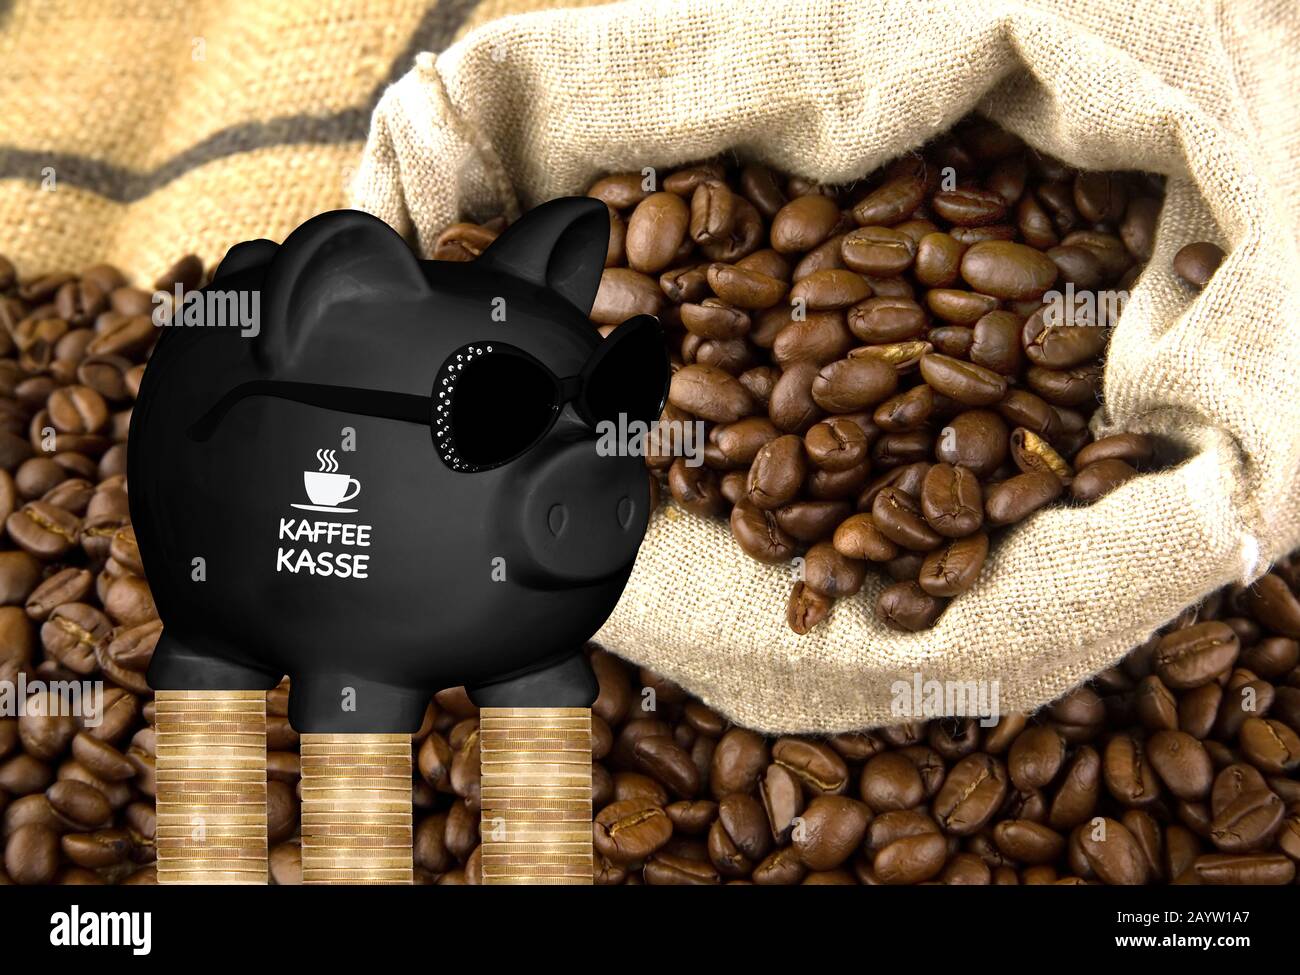 black piggy bank with sun glasses with the lettering Kaffeekasse, kitty, coffee beans and coin stacks in background, composing Stock Photo